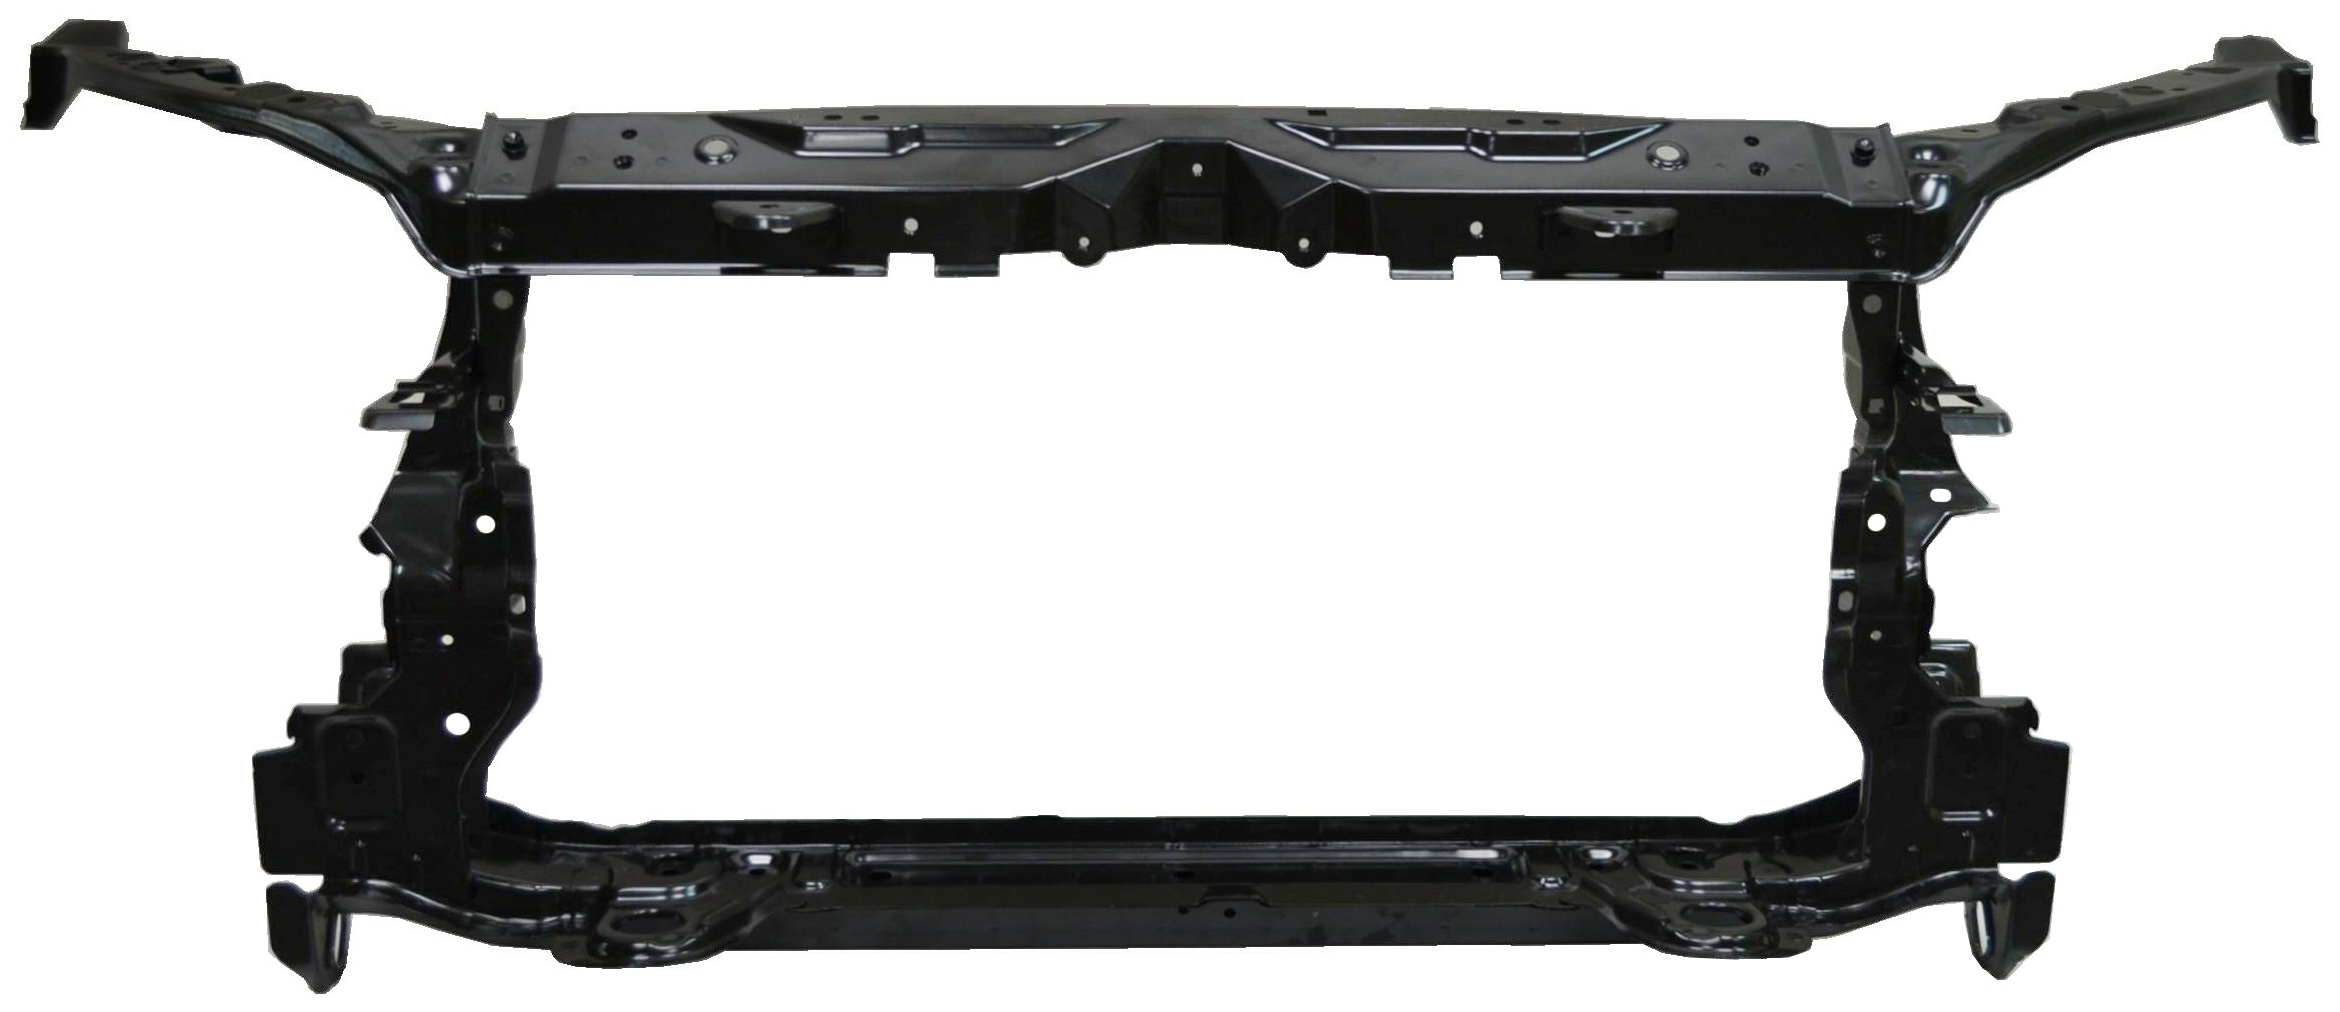 Aftermarket RADIATOR SUPPORTS for TOYOTA - COROLLA, COROLLA,14-19,Radiator support